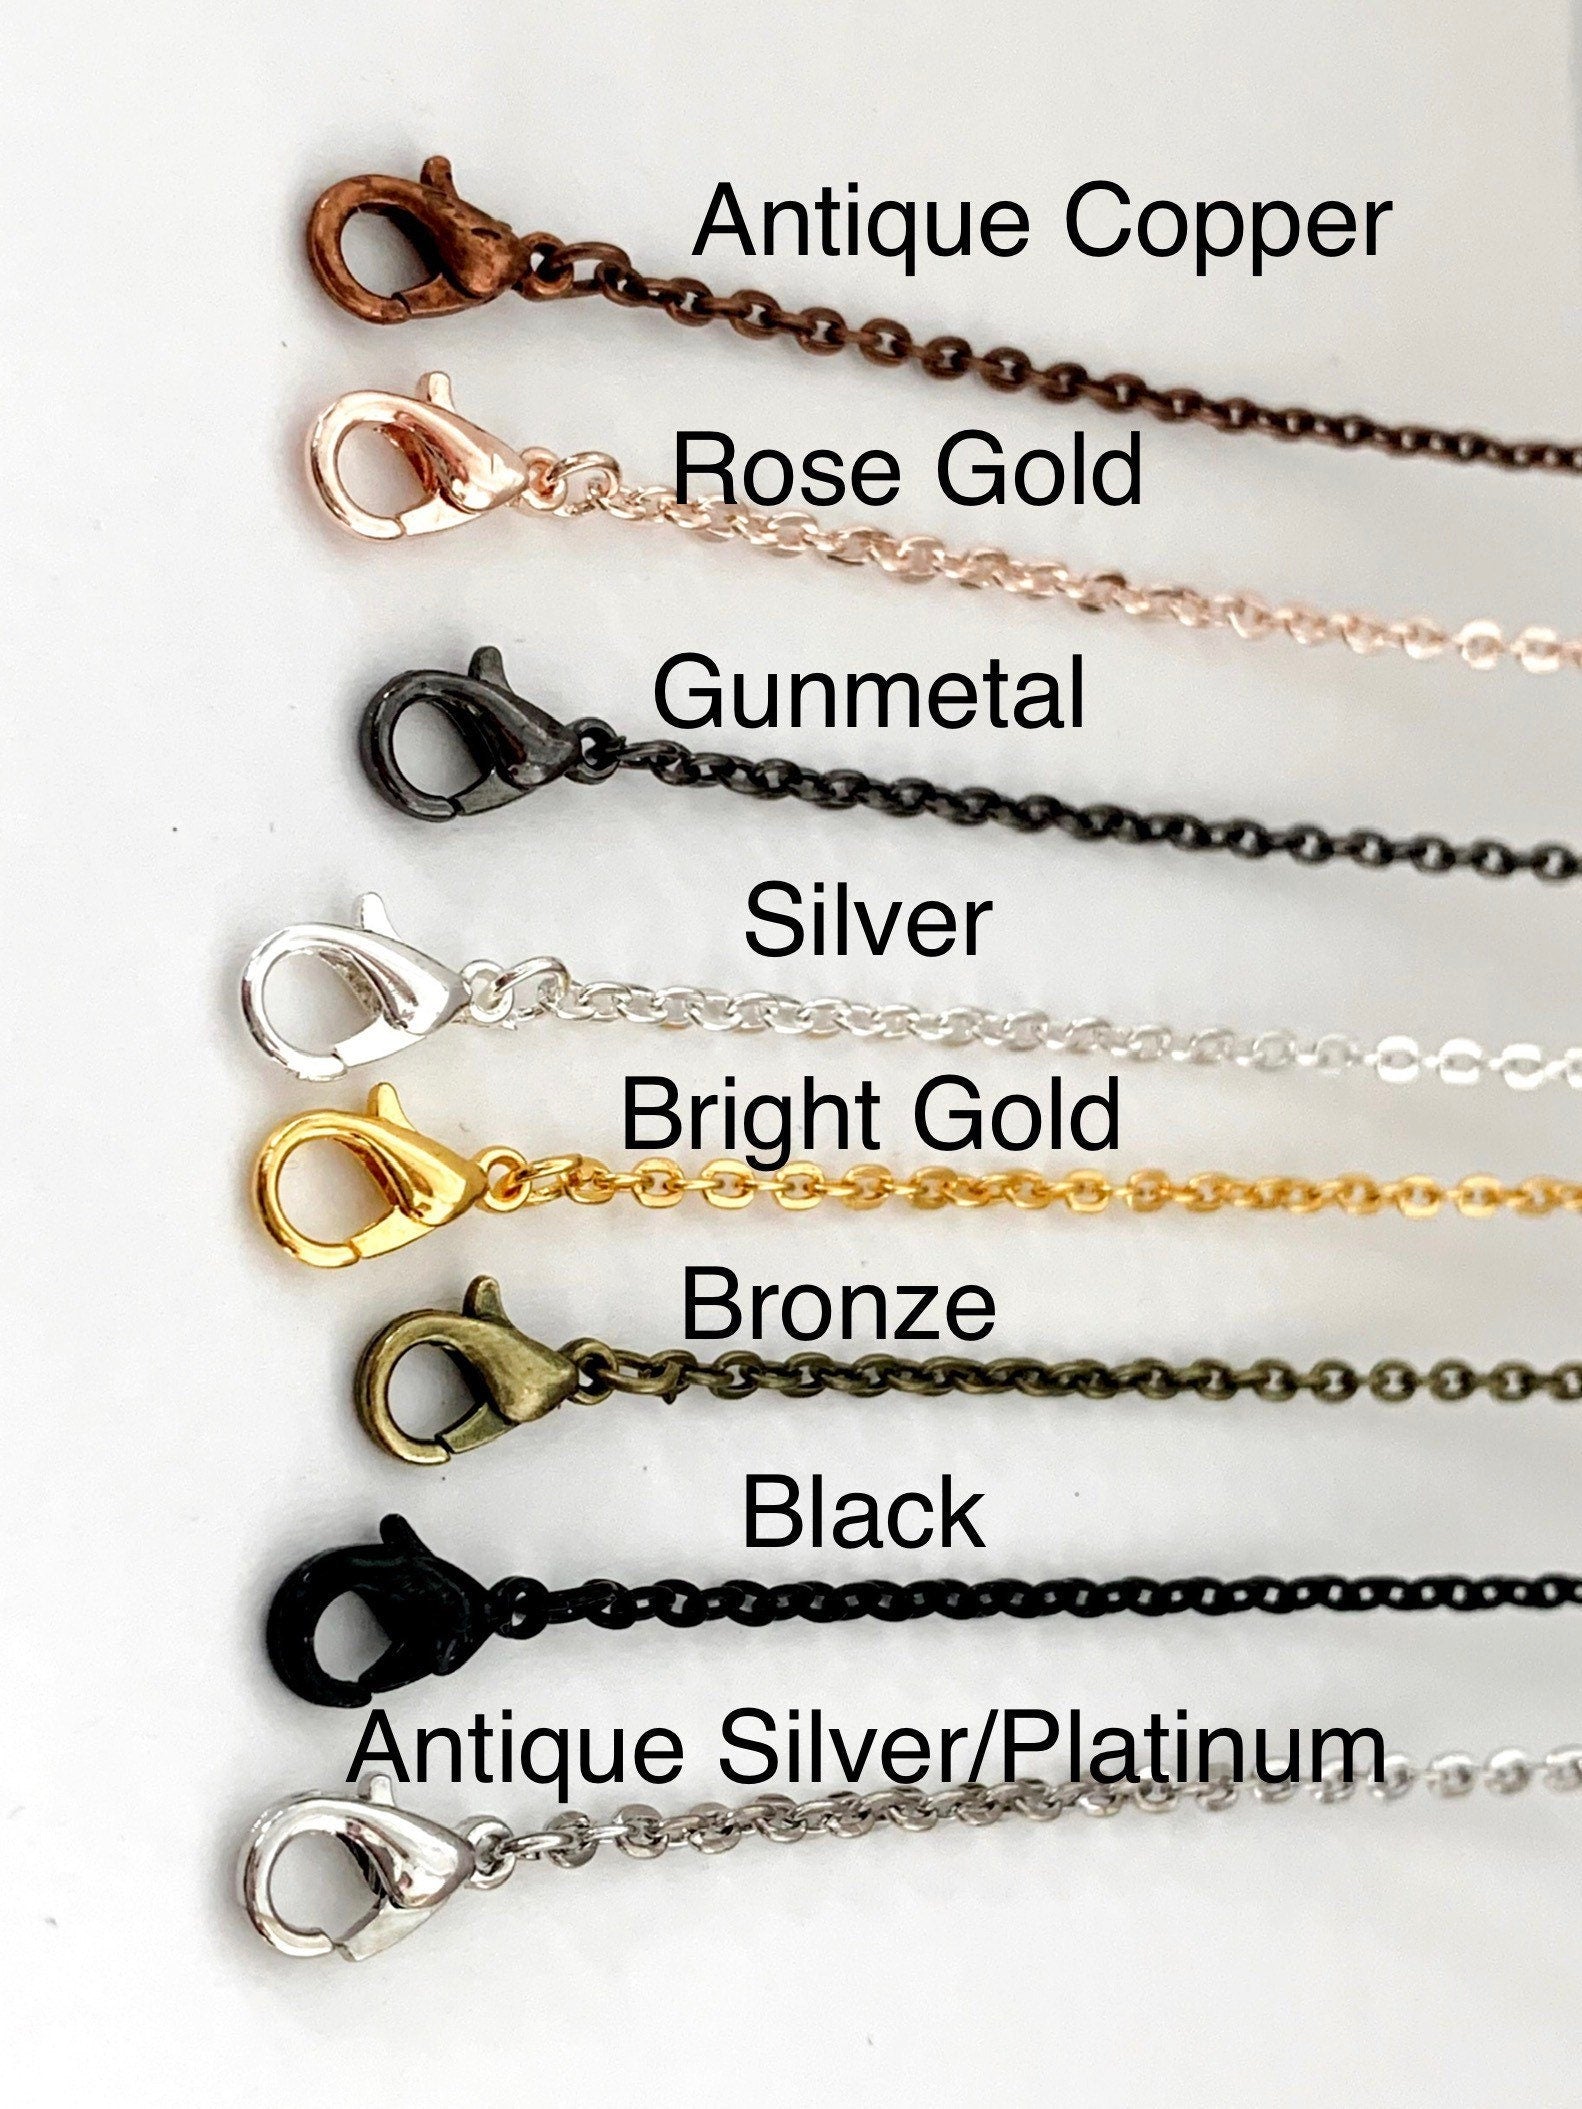 Chain Necklaces Wholesale - 18 inch Bronze, Black, Silver plated , Copper, or Antique Silver Chain Necklaces GREAT Quality